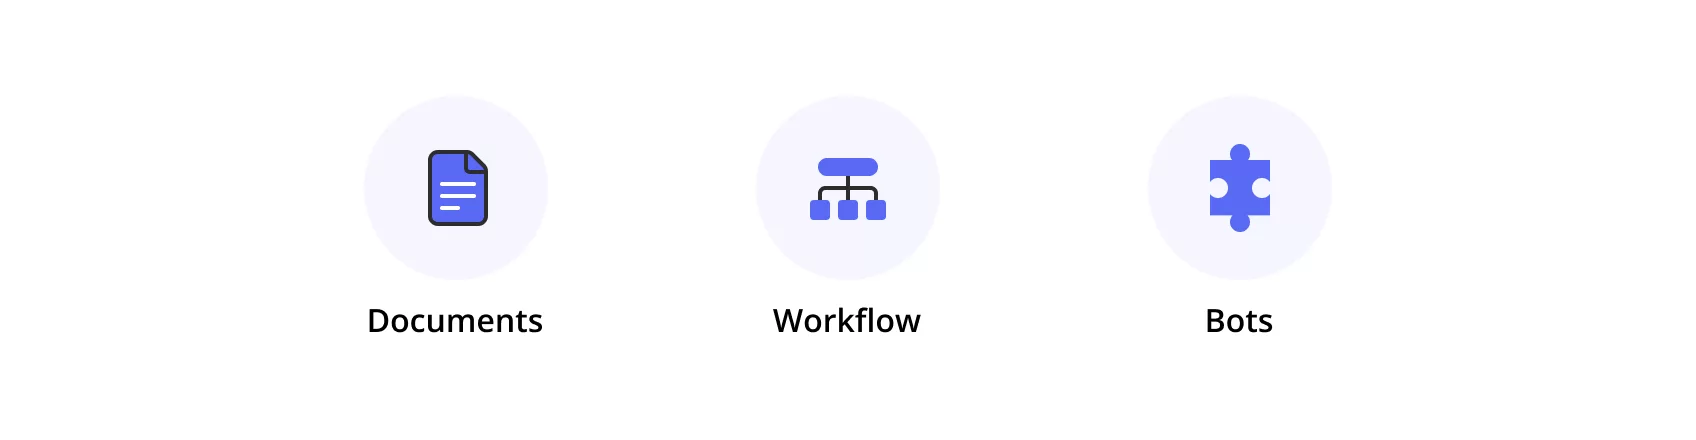 airSlate's workflow automation capabilities